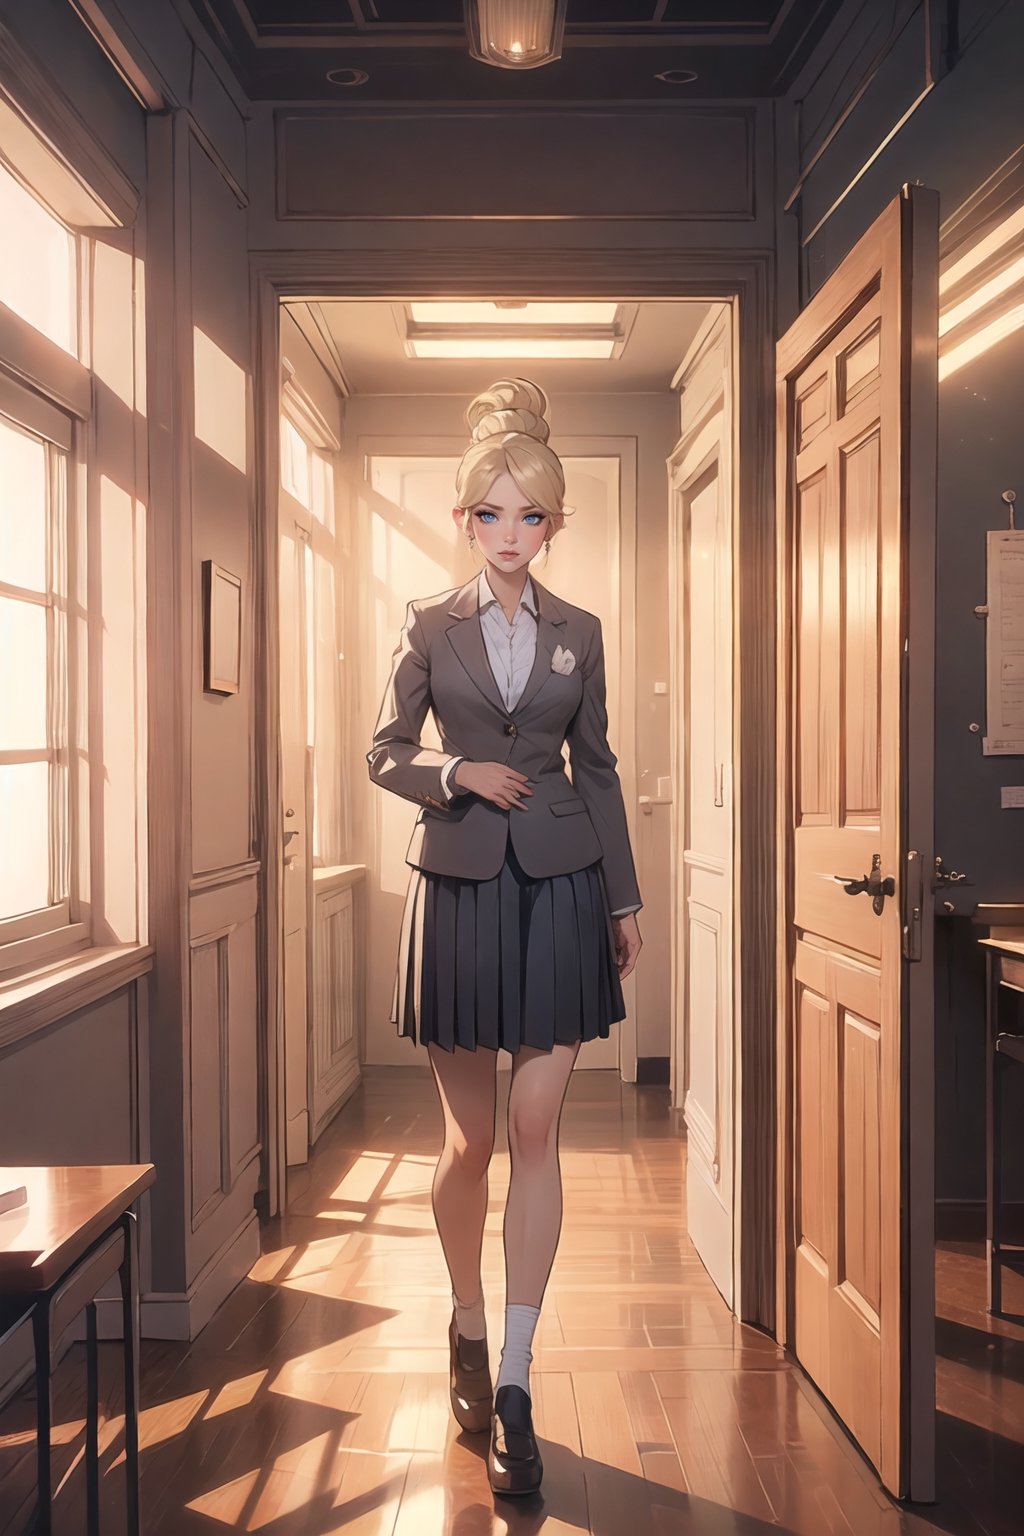 Subject(Eris Etolia. Blonde, FontBangs, Ponytail)
Theme(a inter-dimentional portal in a classroom, sci-fi)
Outfit(tailored blazer, blouse v-neck, skirt length is shortened, white socks add, sleek high heeled loafers)

ClassroomSetting(An ordinary classroom bathed in fluorescent light)
Surreal Anomaly(A shimmering tear in reality appears, pulsating with otherworldly energy)
DistortedAtmosphere(Air wavers, hinting at unseen vistas beyond comprehension)
GatewaytotheUnknown(All realize they stand before a doorway to unimaginable realms)

💡 **Additional Enhancers:** ((High-Quality)), ((Aesthetic)), ((Masterpiece)), (Intricate Details), Coherent Shape, (Stunning Illustration), [Dramatic Lightning],midjourney